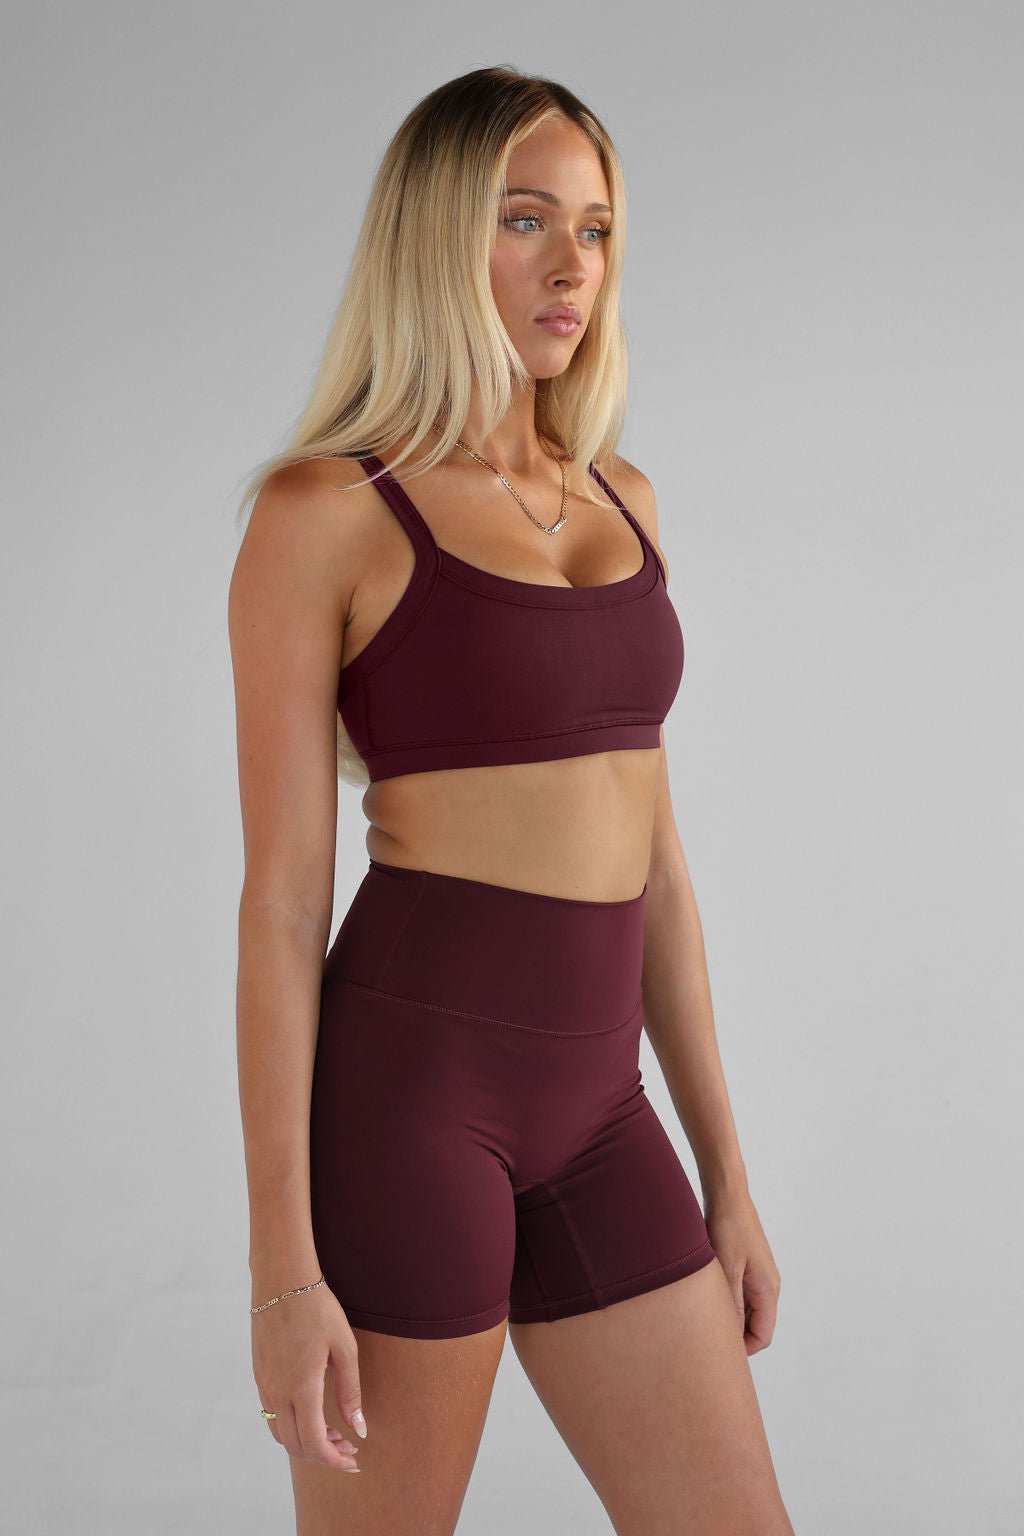 SCULPT Cross Back Crop - Cherry Cola SHIPPING FROM 12/02 - LEELO ACTIVE